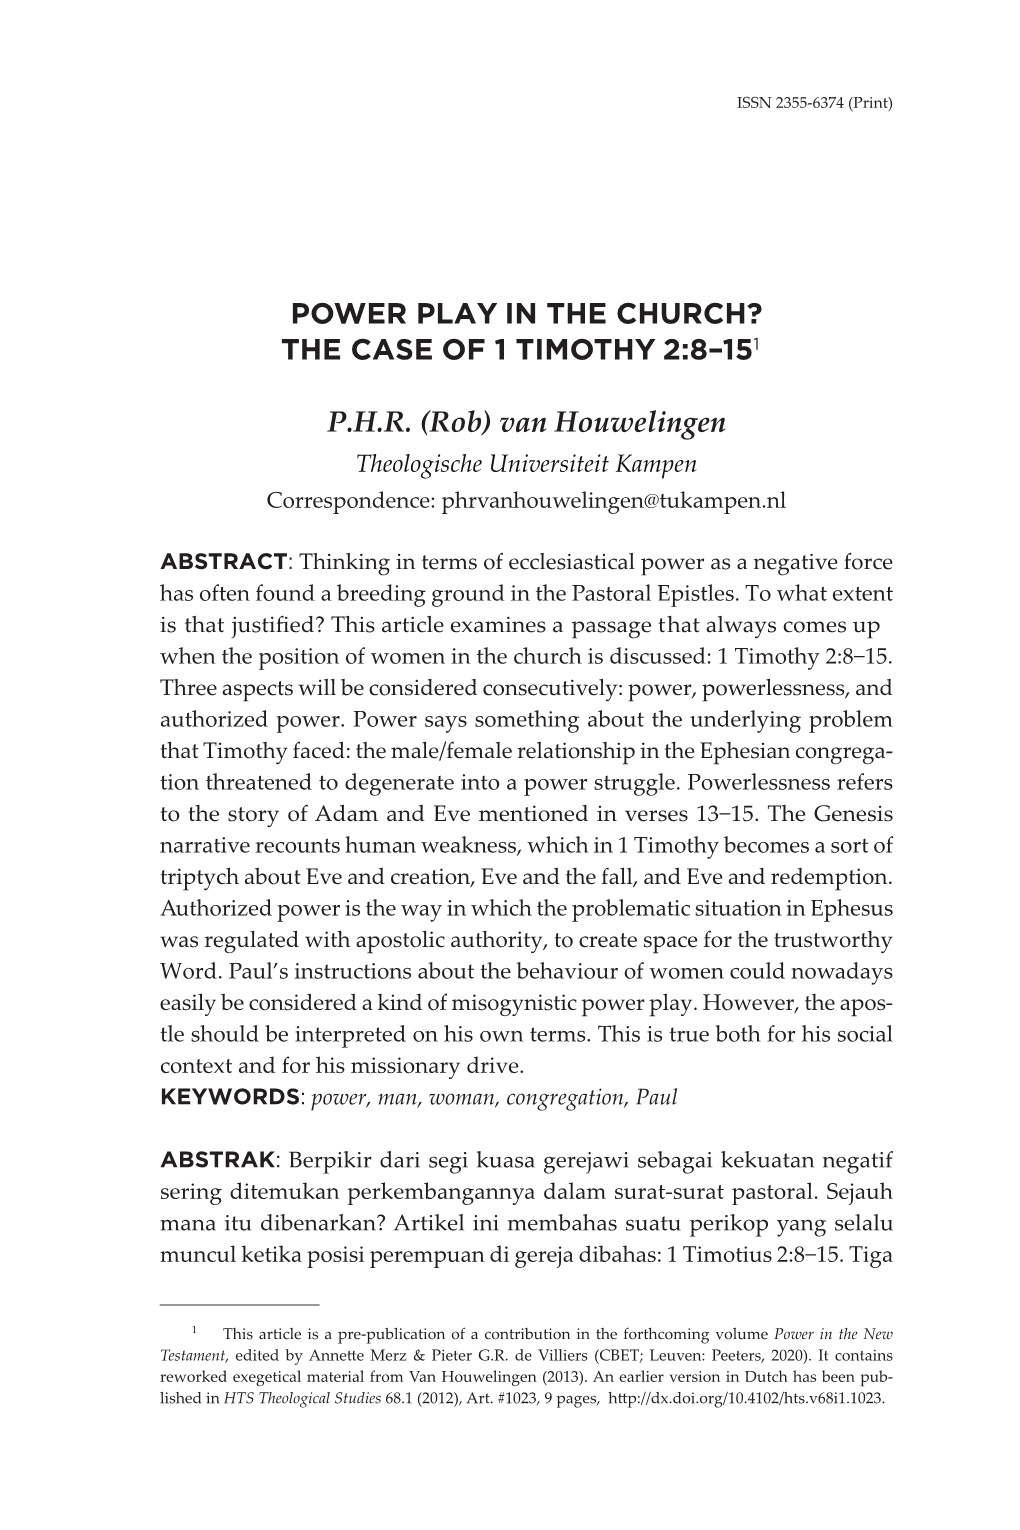 Power Play in the Church? the Case of 1 Timothy 2:8–151